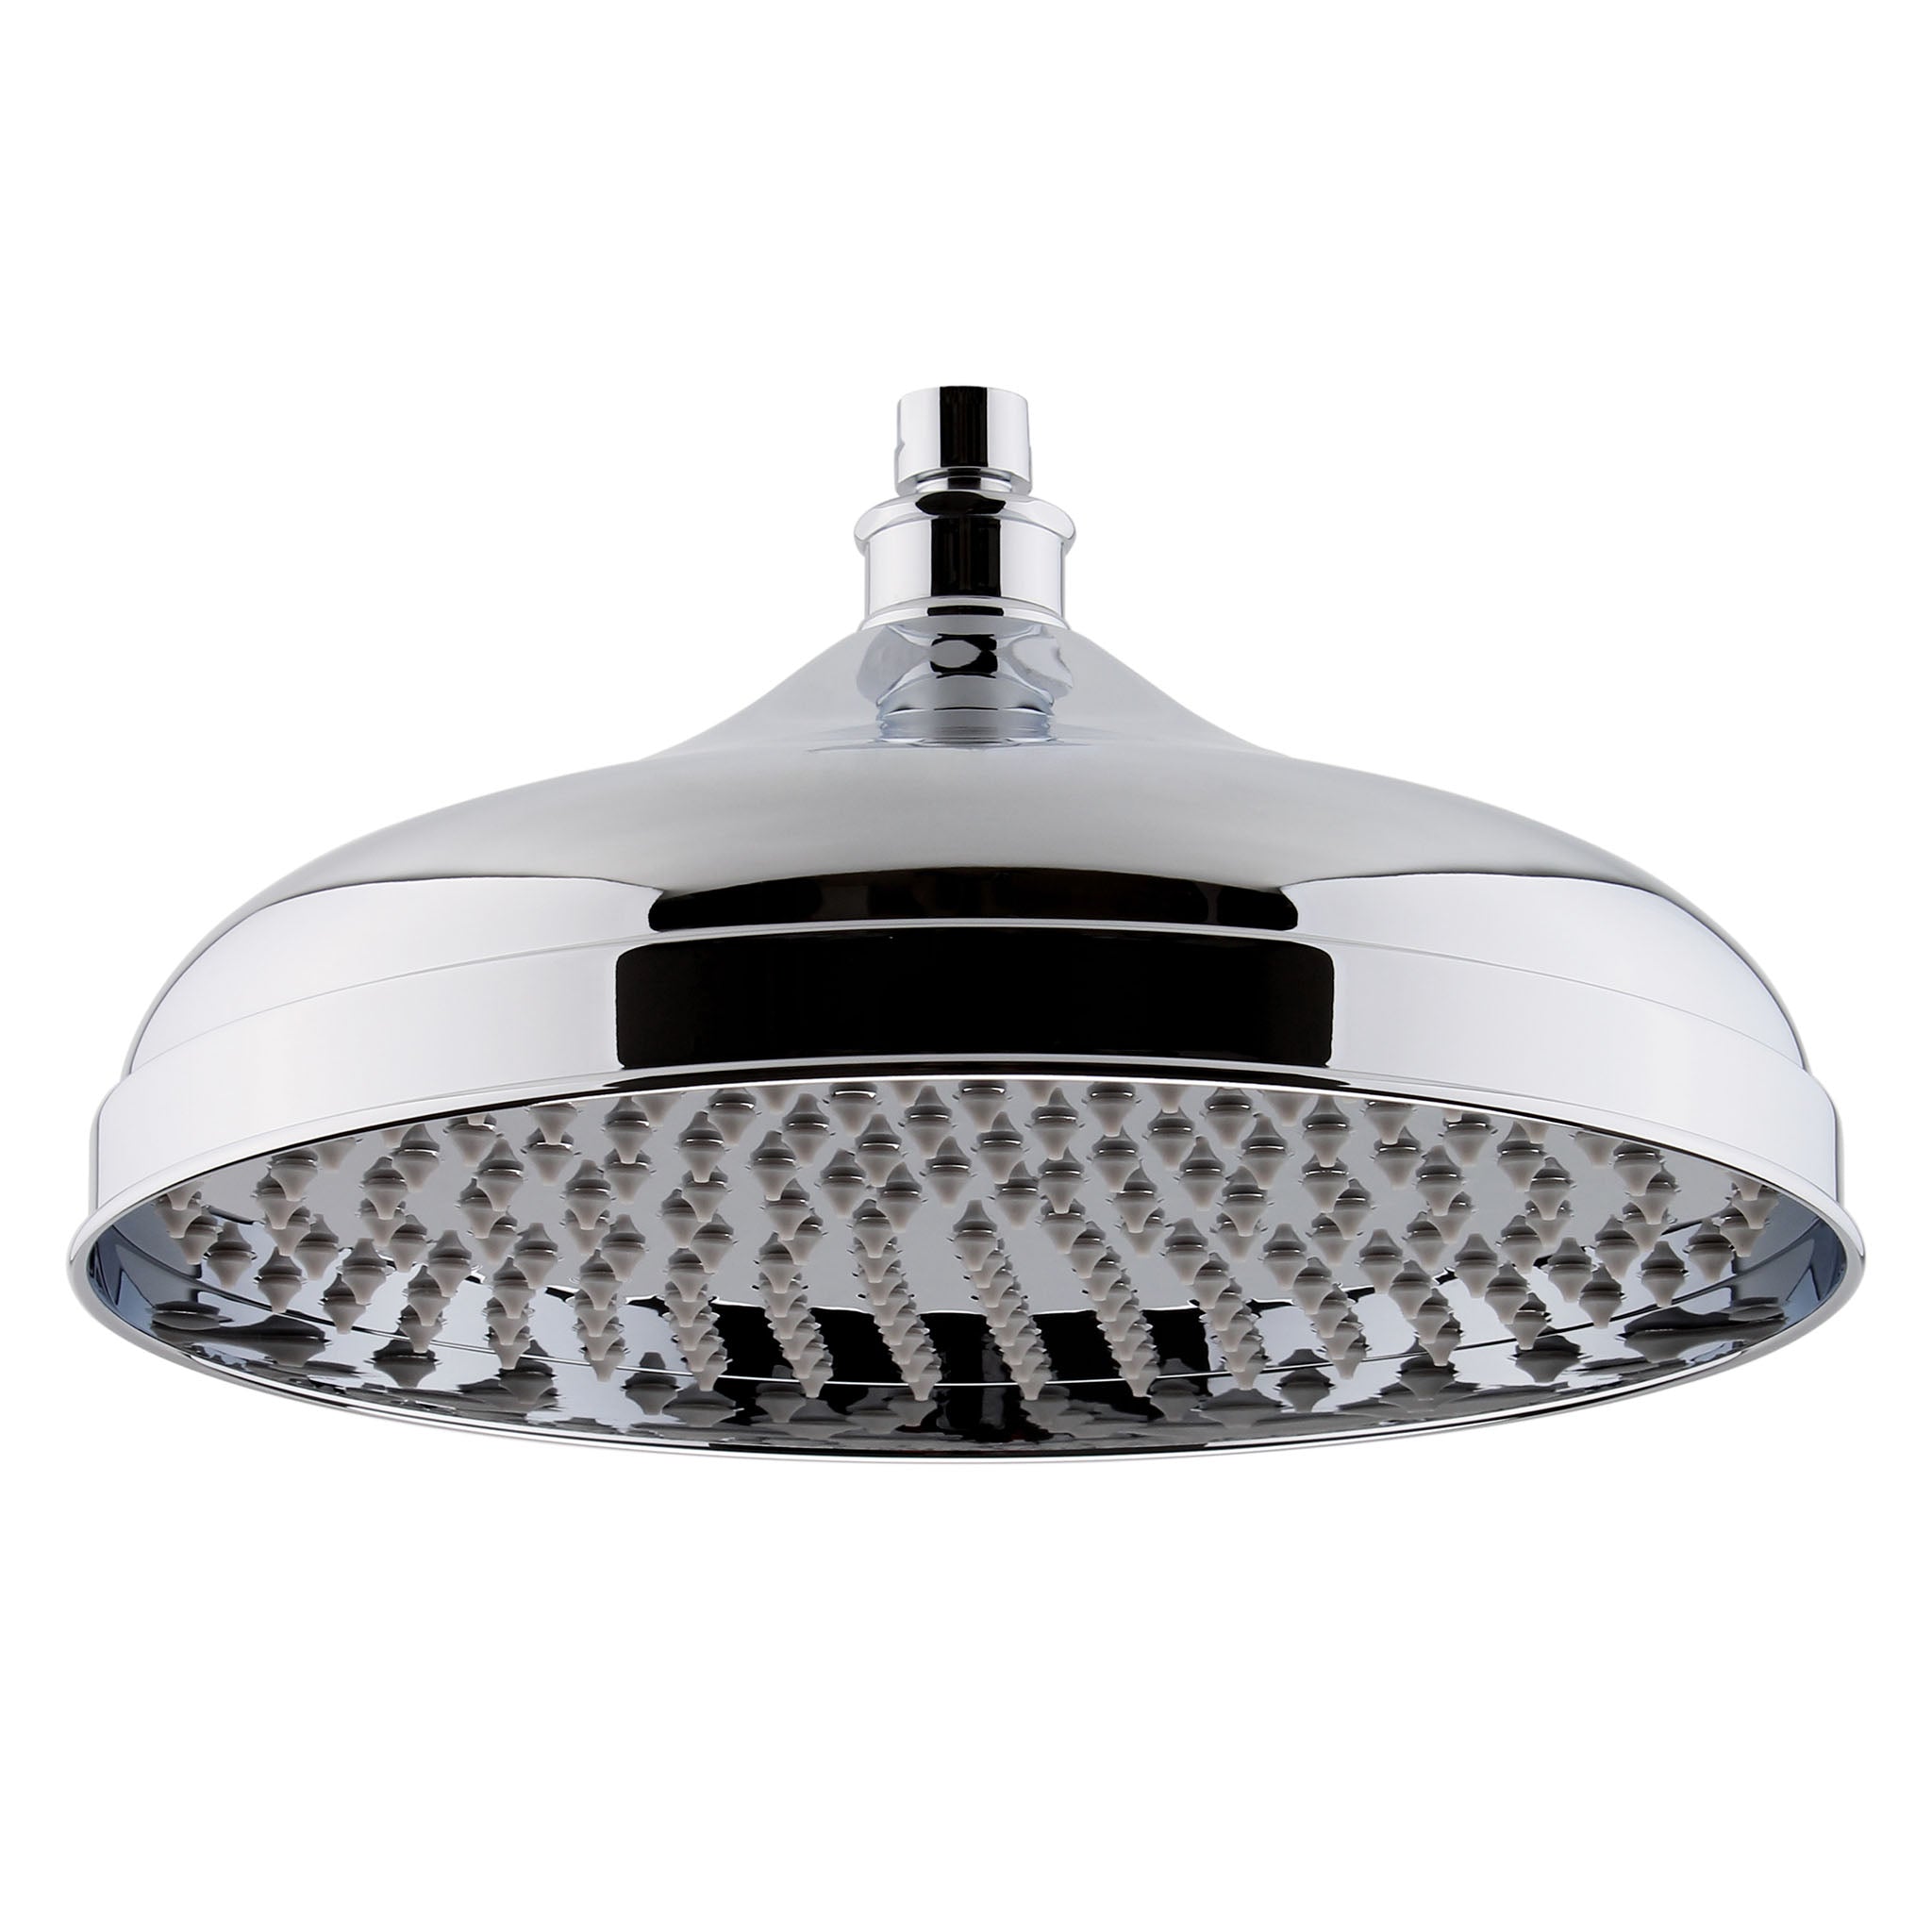 Bayswater 12" Apron Fixed Shower Head